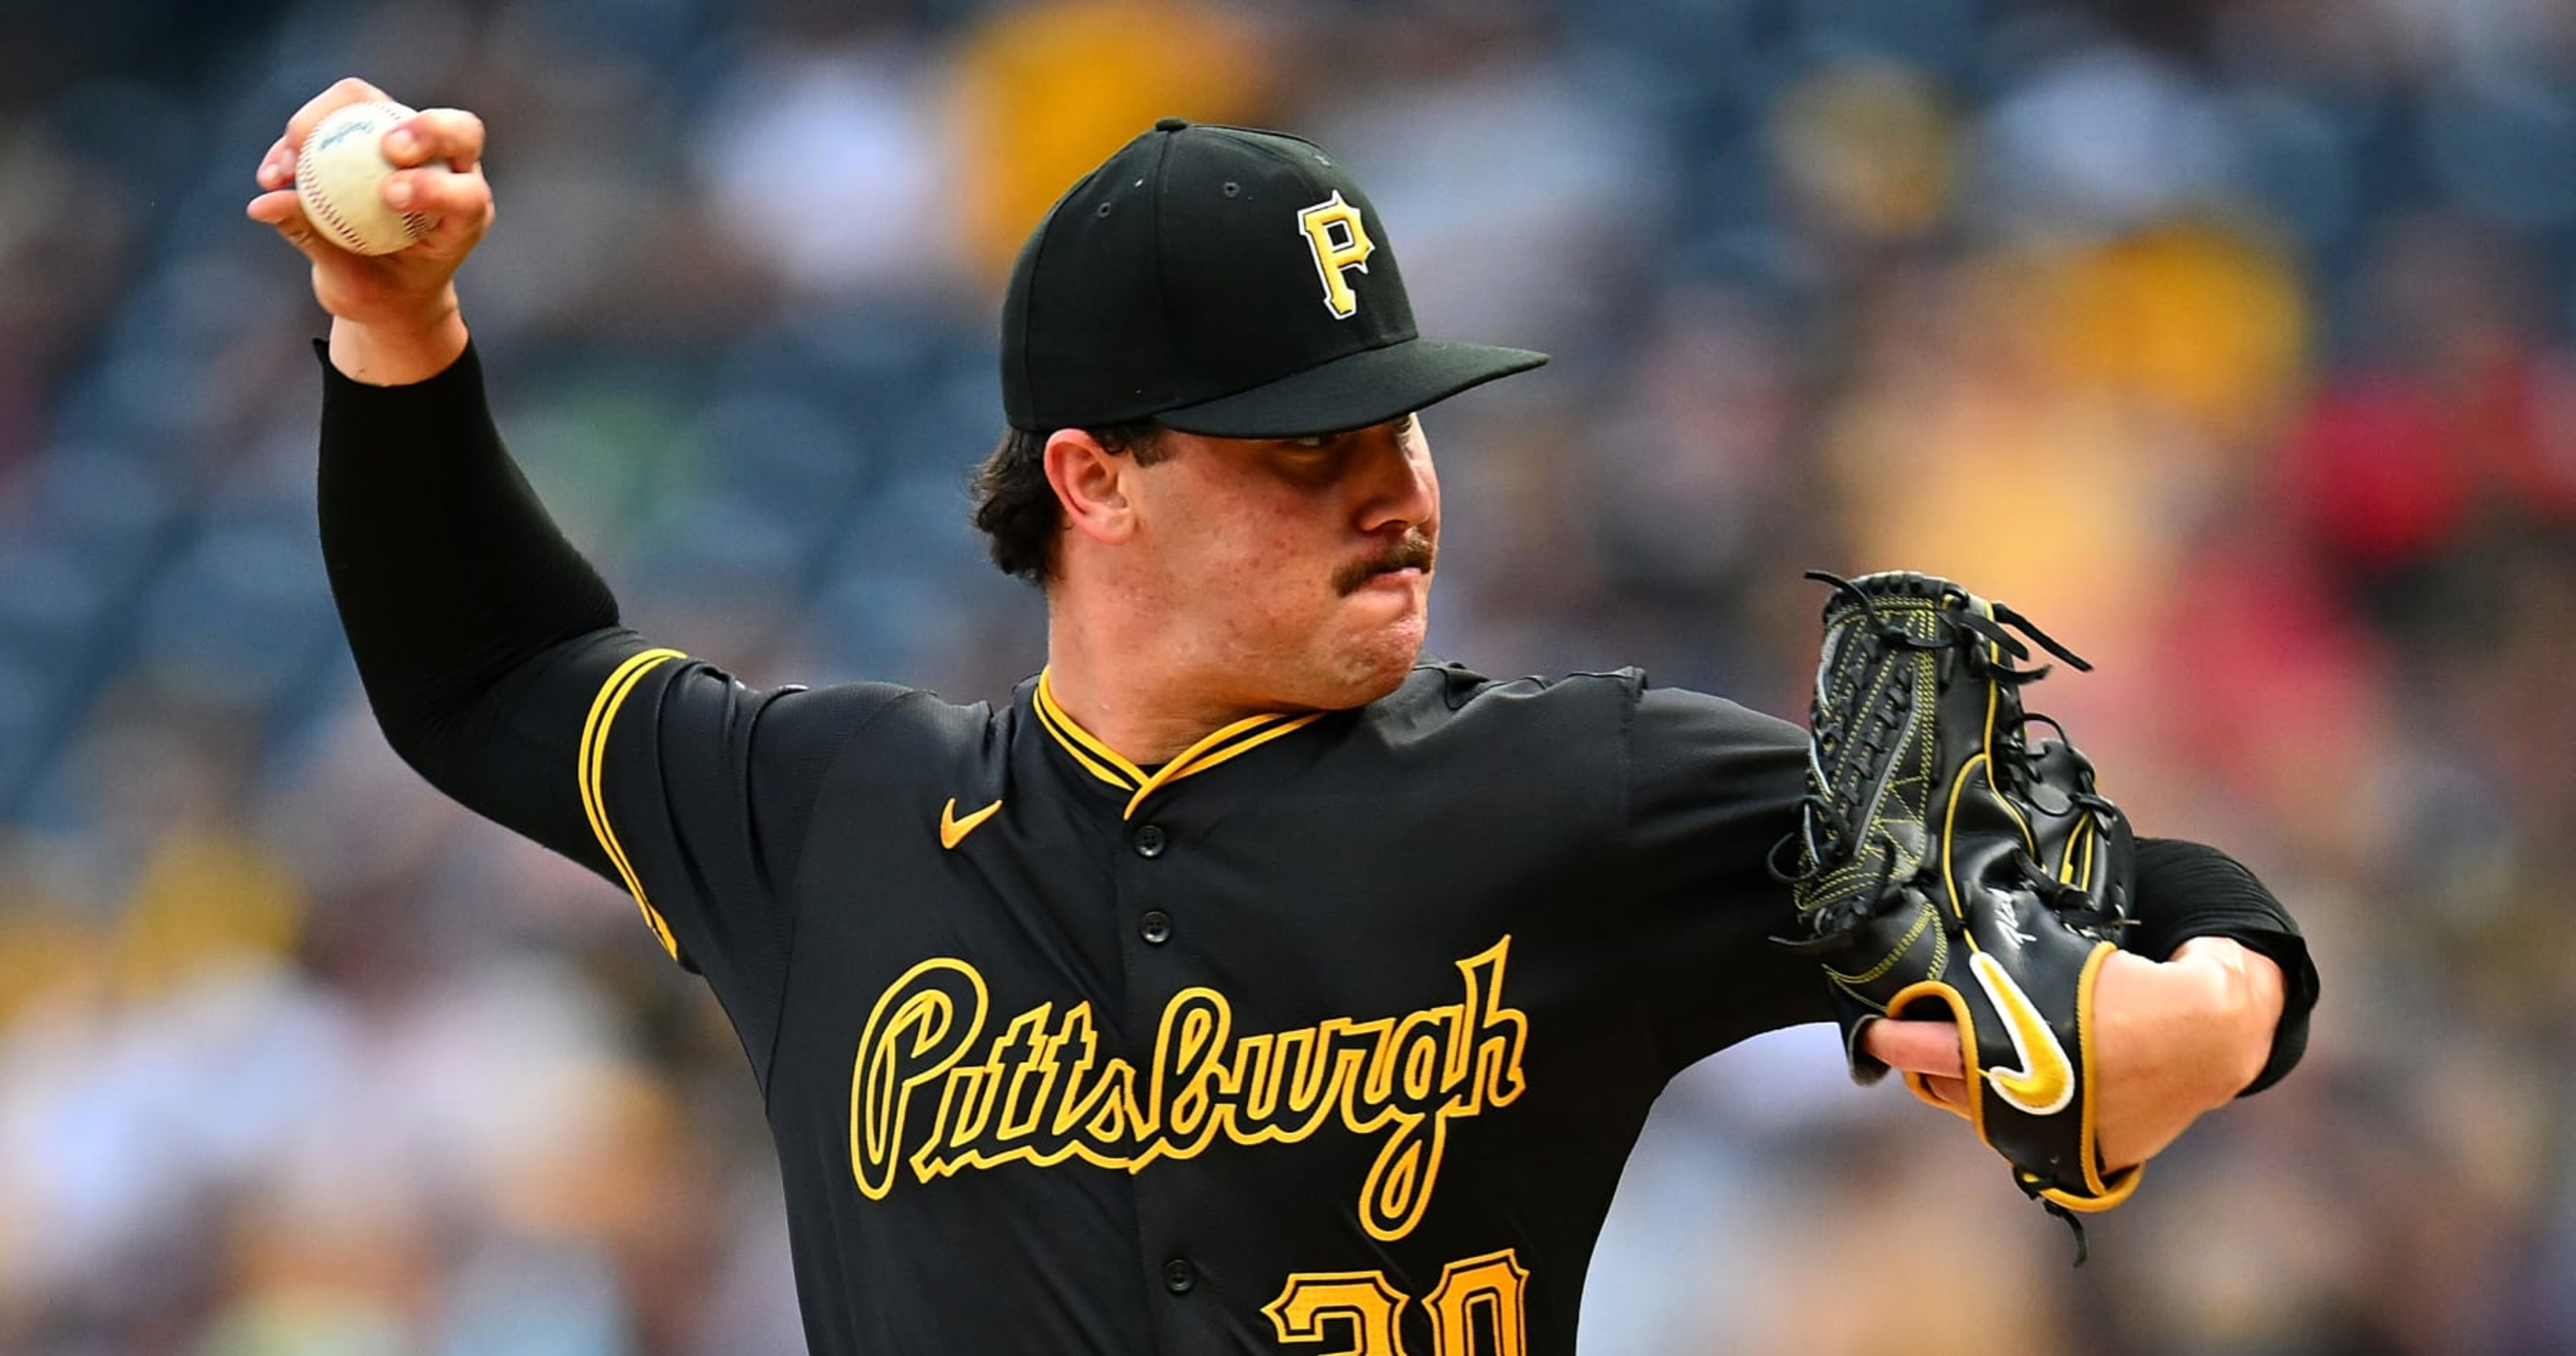 Pirates' Paul Skenes Talks Lack of Run Support After 1st Loss of MLB Career